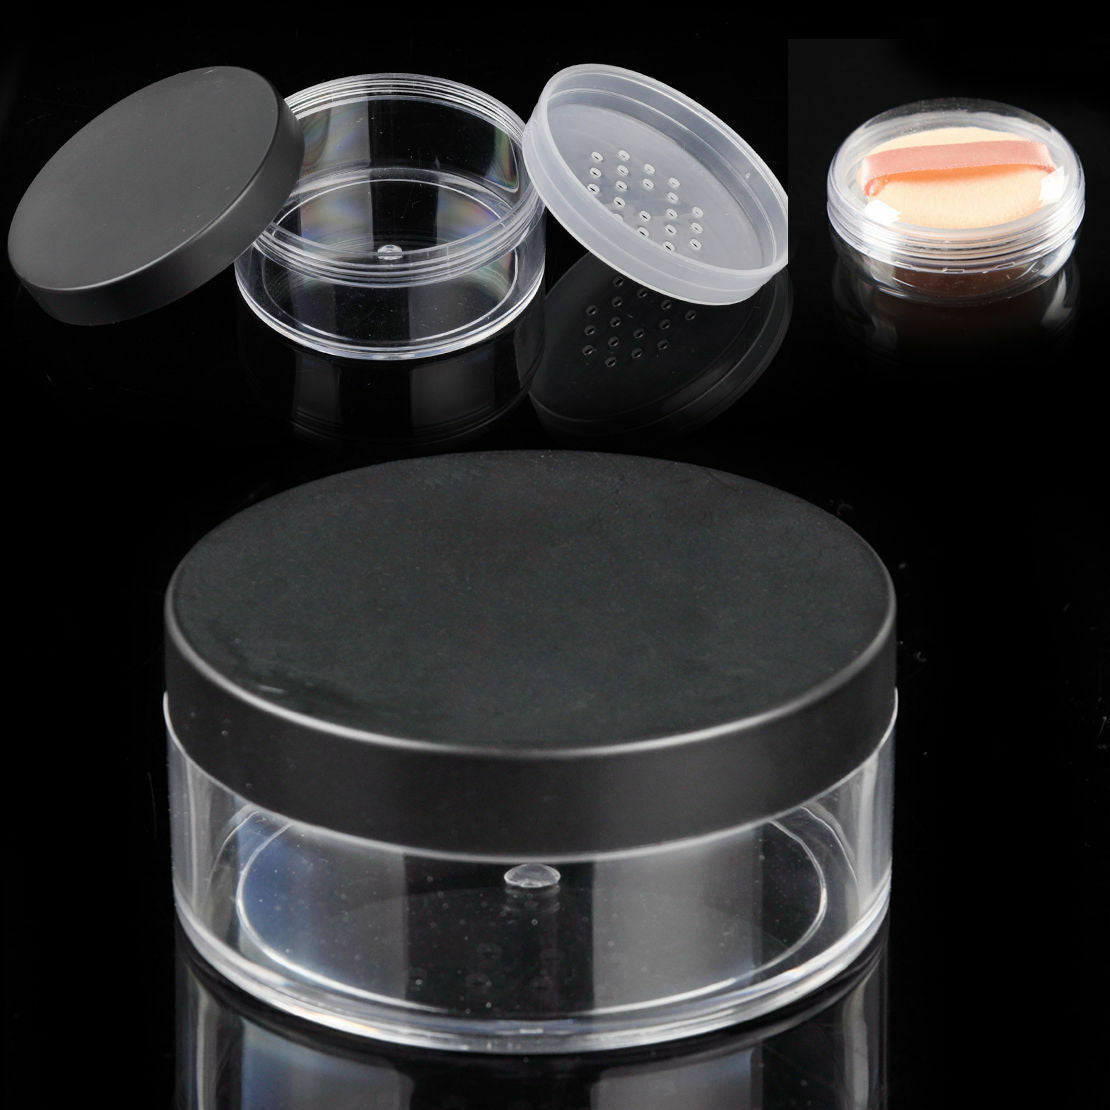 50g Powder Jar Box Case Empty Cosmetic Container Sponge Puff for Makeup Travel